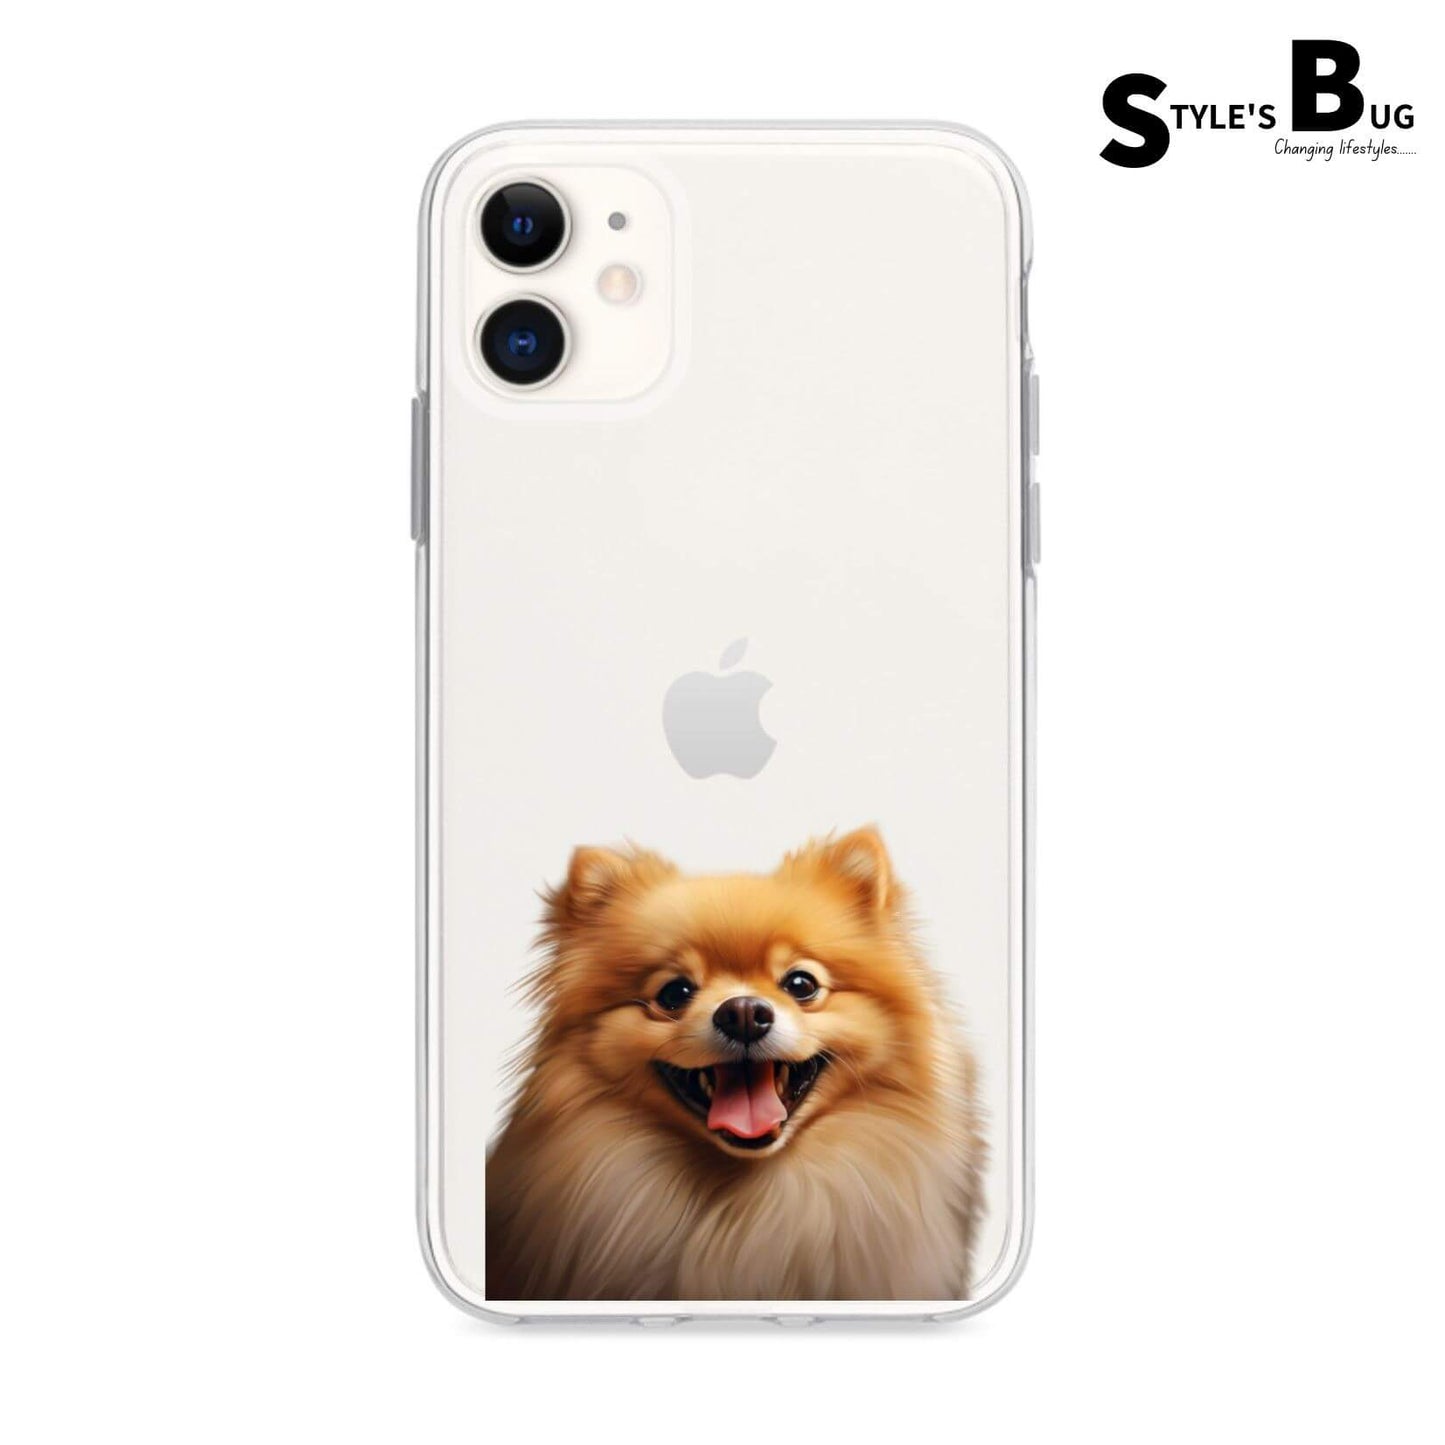 Smiling Dog phone cases from Style's Bug (UV printed) - Style's Bug Pomeranian